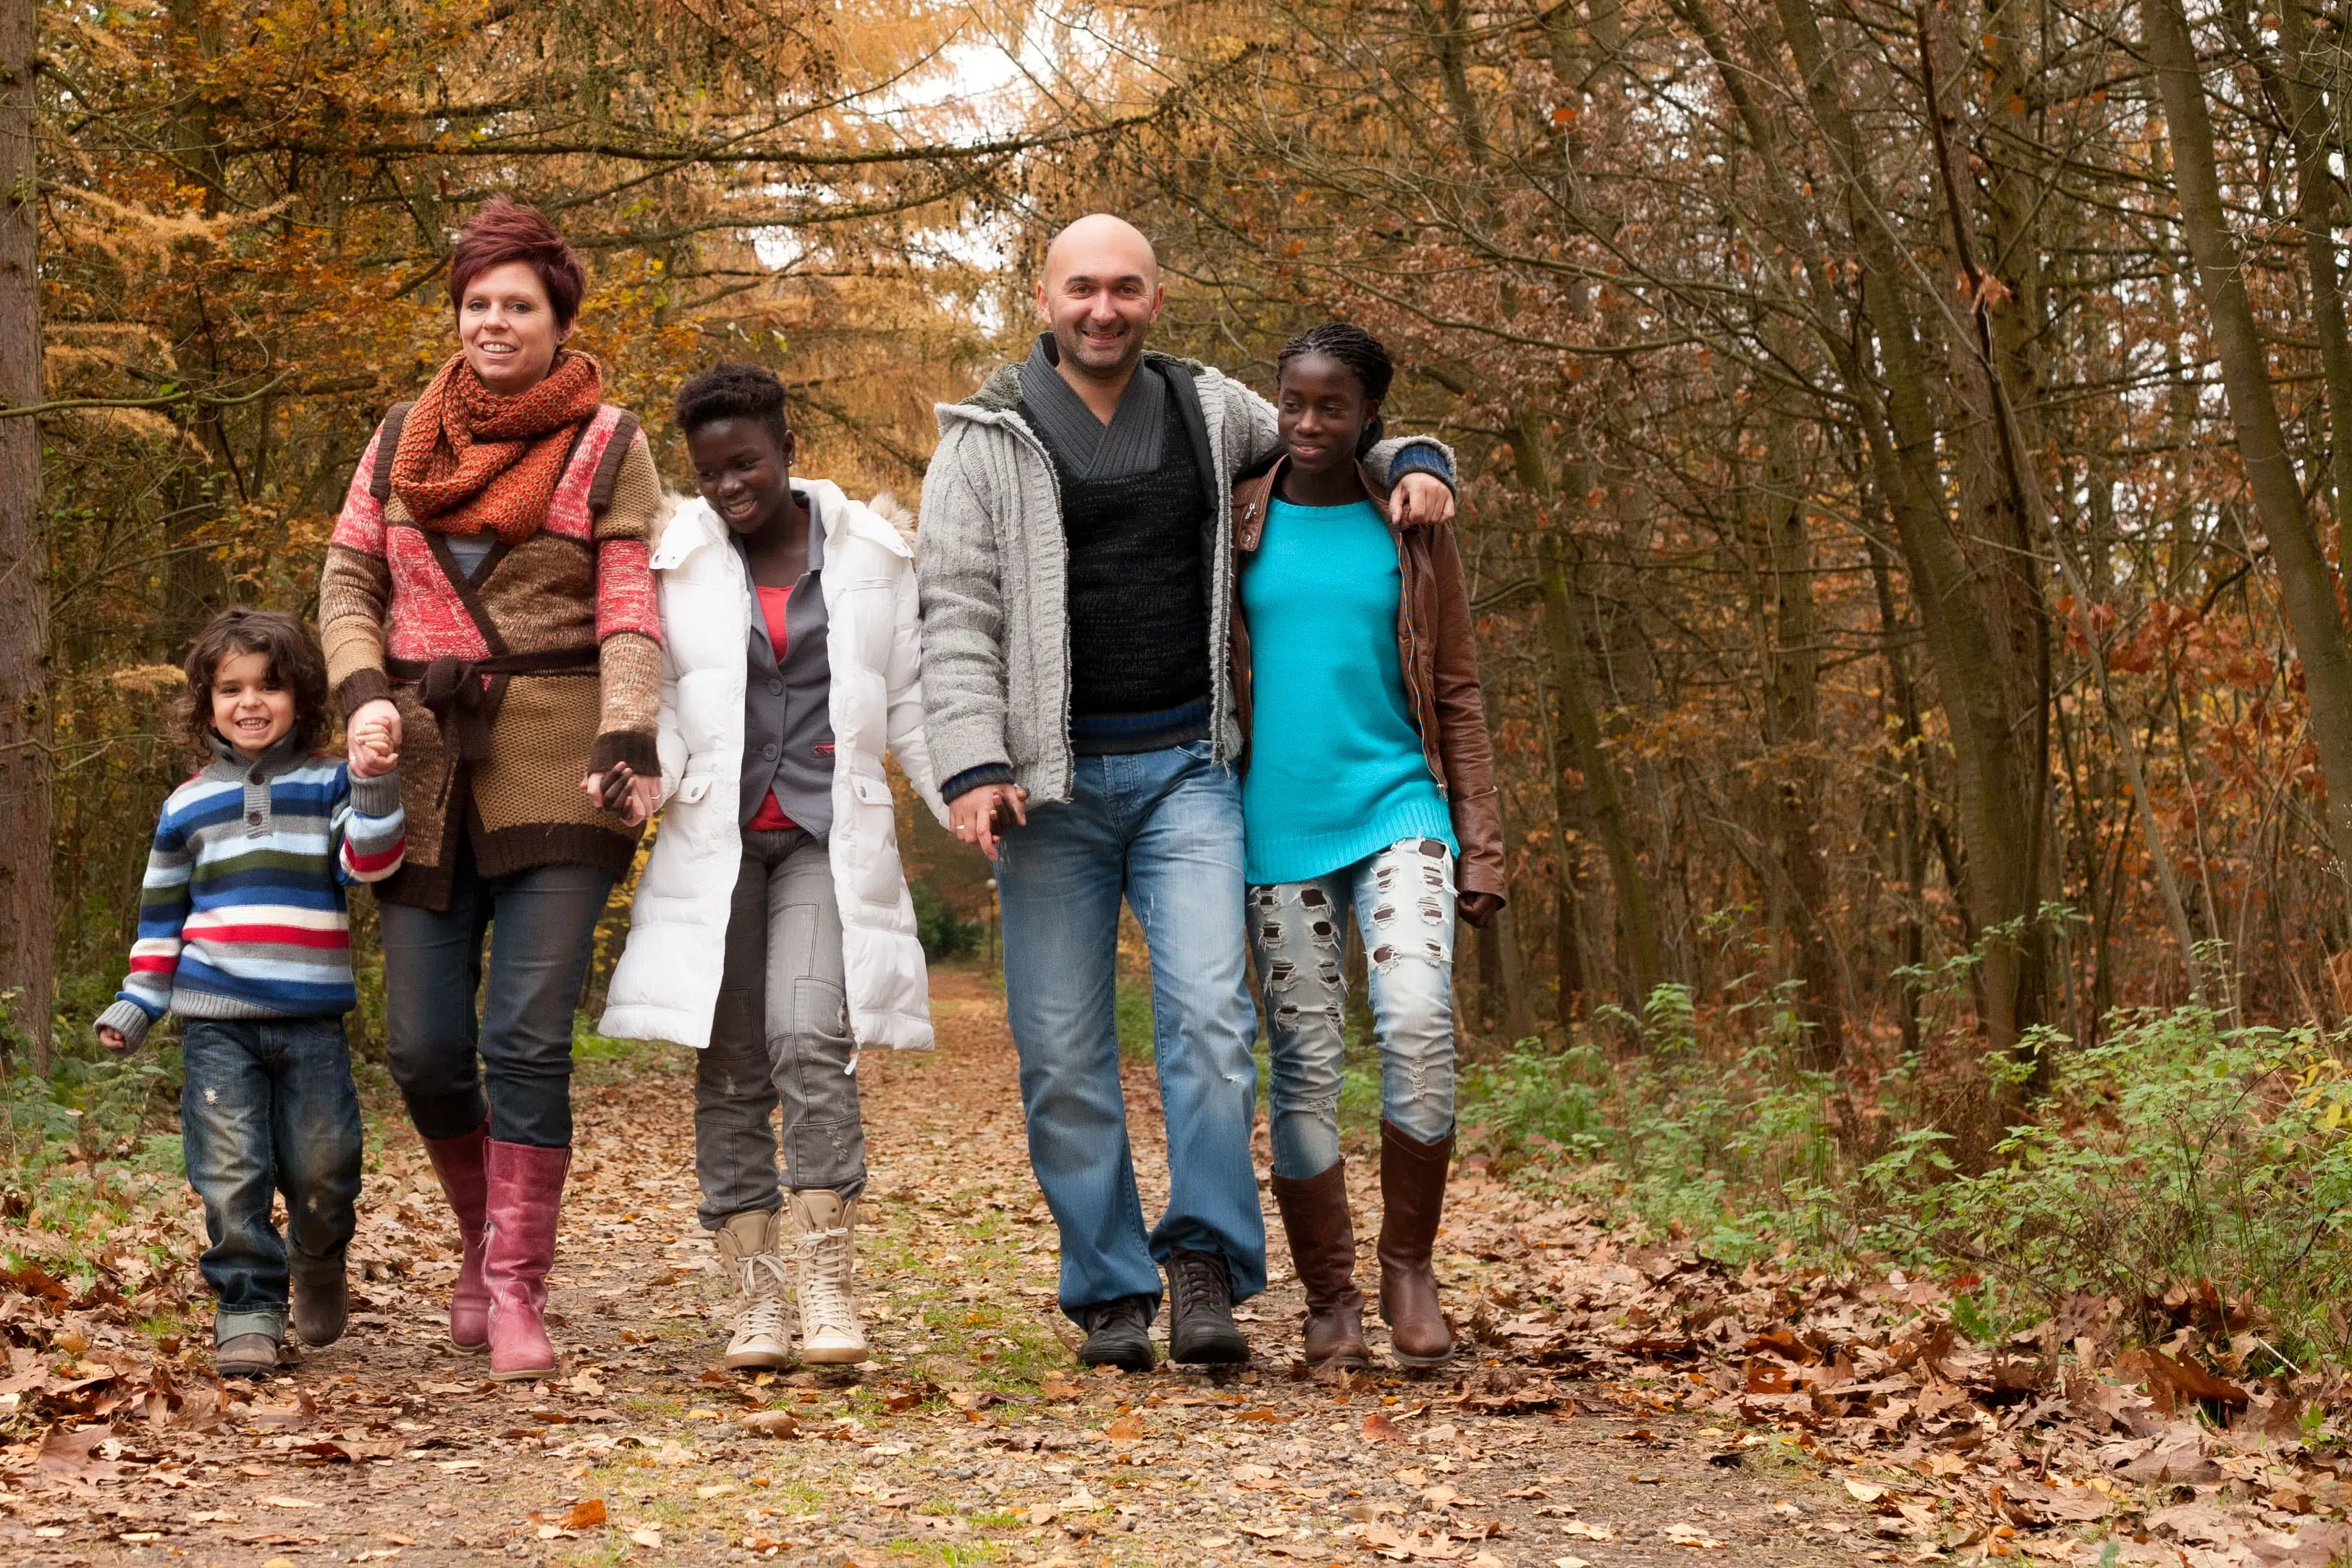 Foster Family Walking Through The Forest To Represent Foster Parents